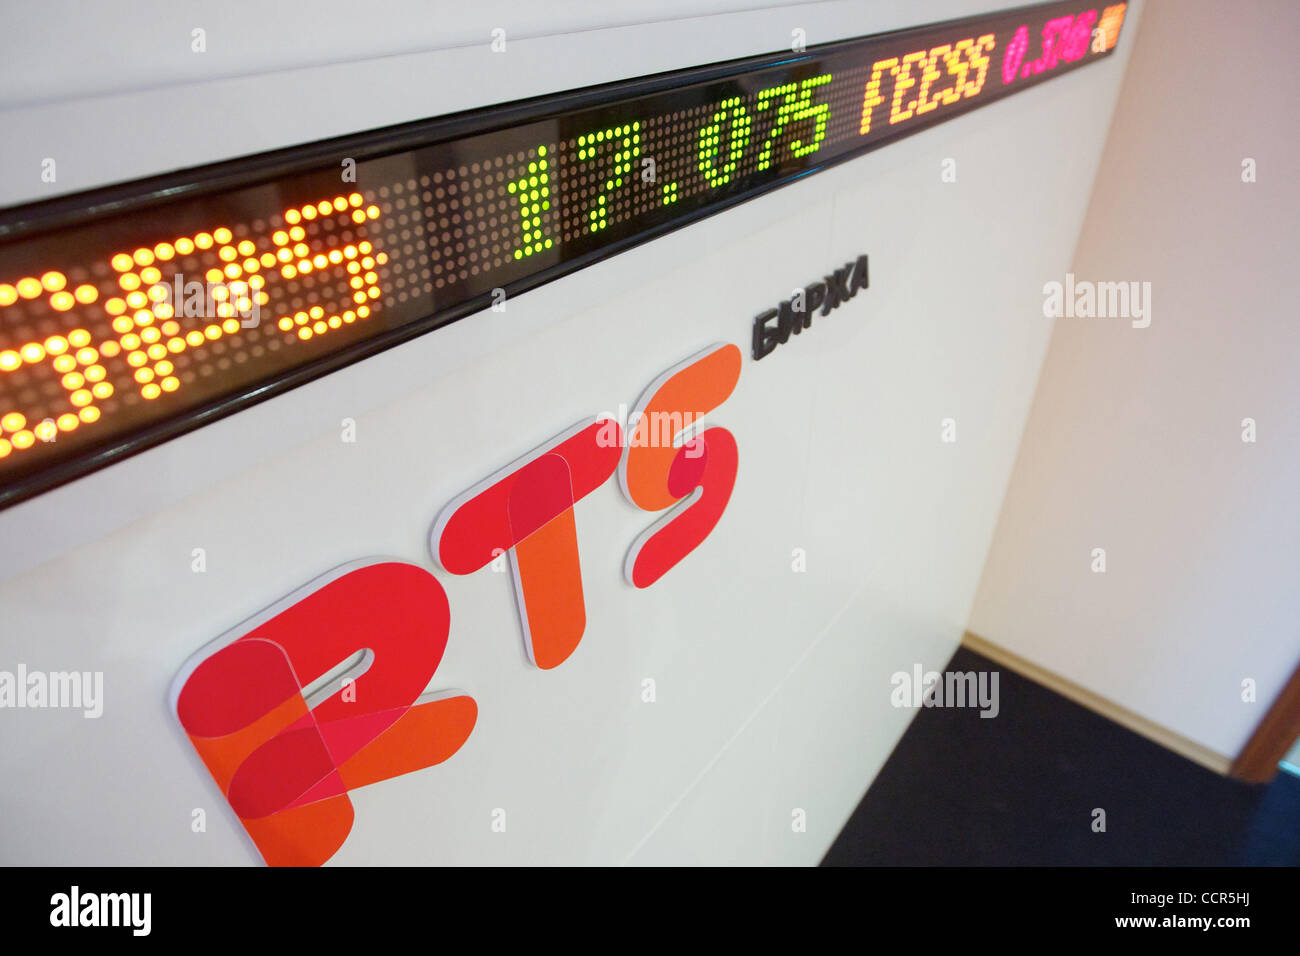 Russian Trading System Stock Exchange RTS in Moscow. Established in 1995,  as the first regulated stock market in Russia, RTS Stock Exchange now  trades the full range of financial instruments from cash